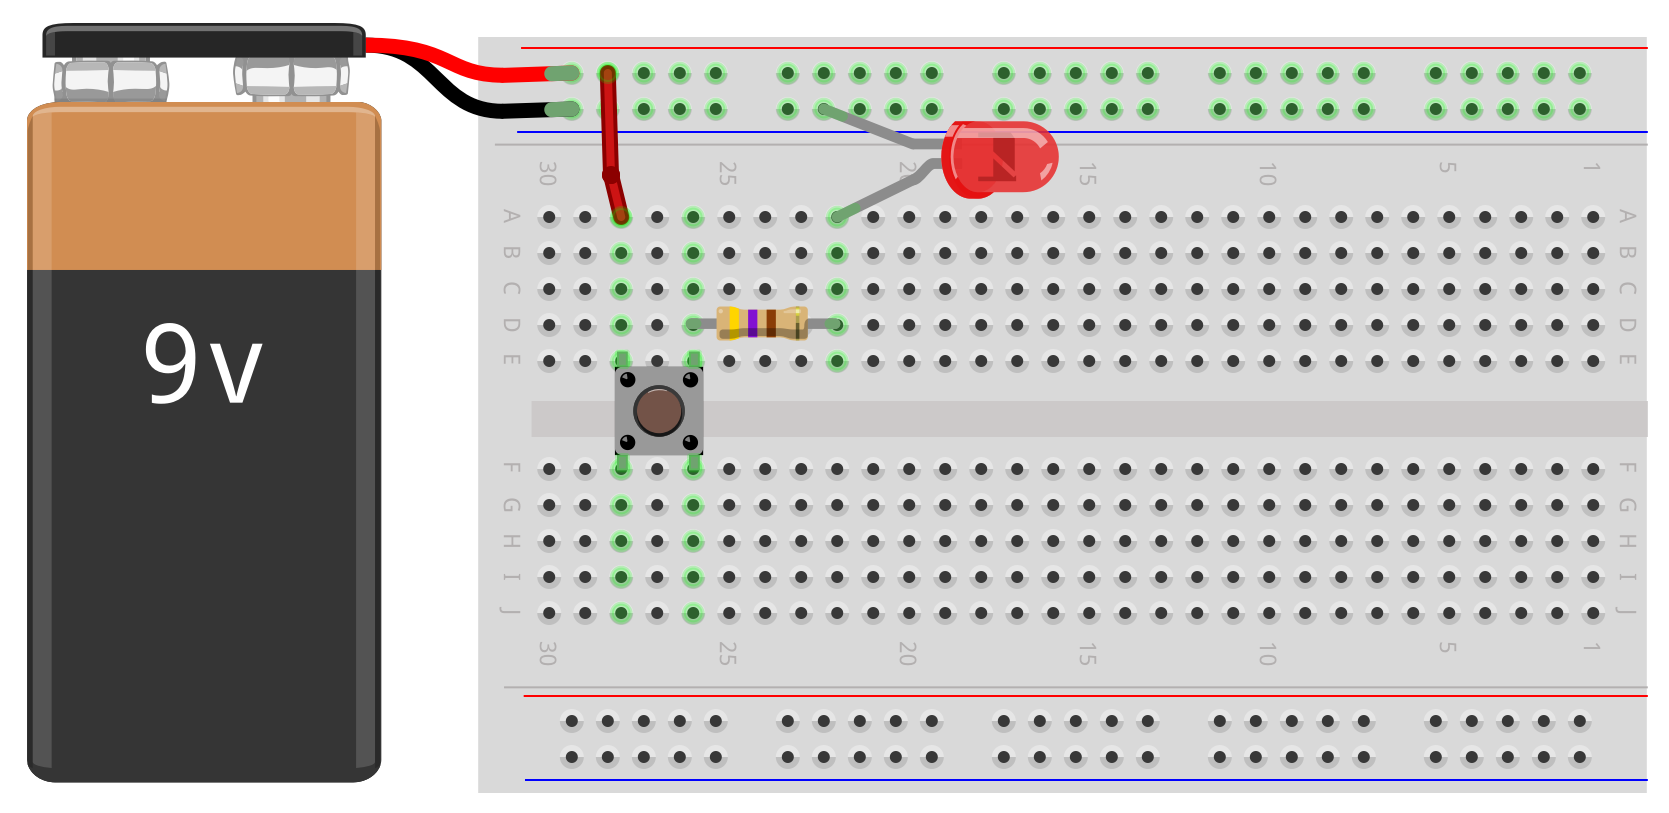 Four-legged button circuit with 5V pin